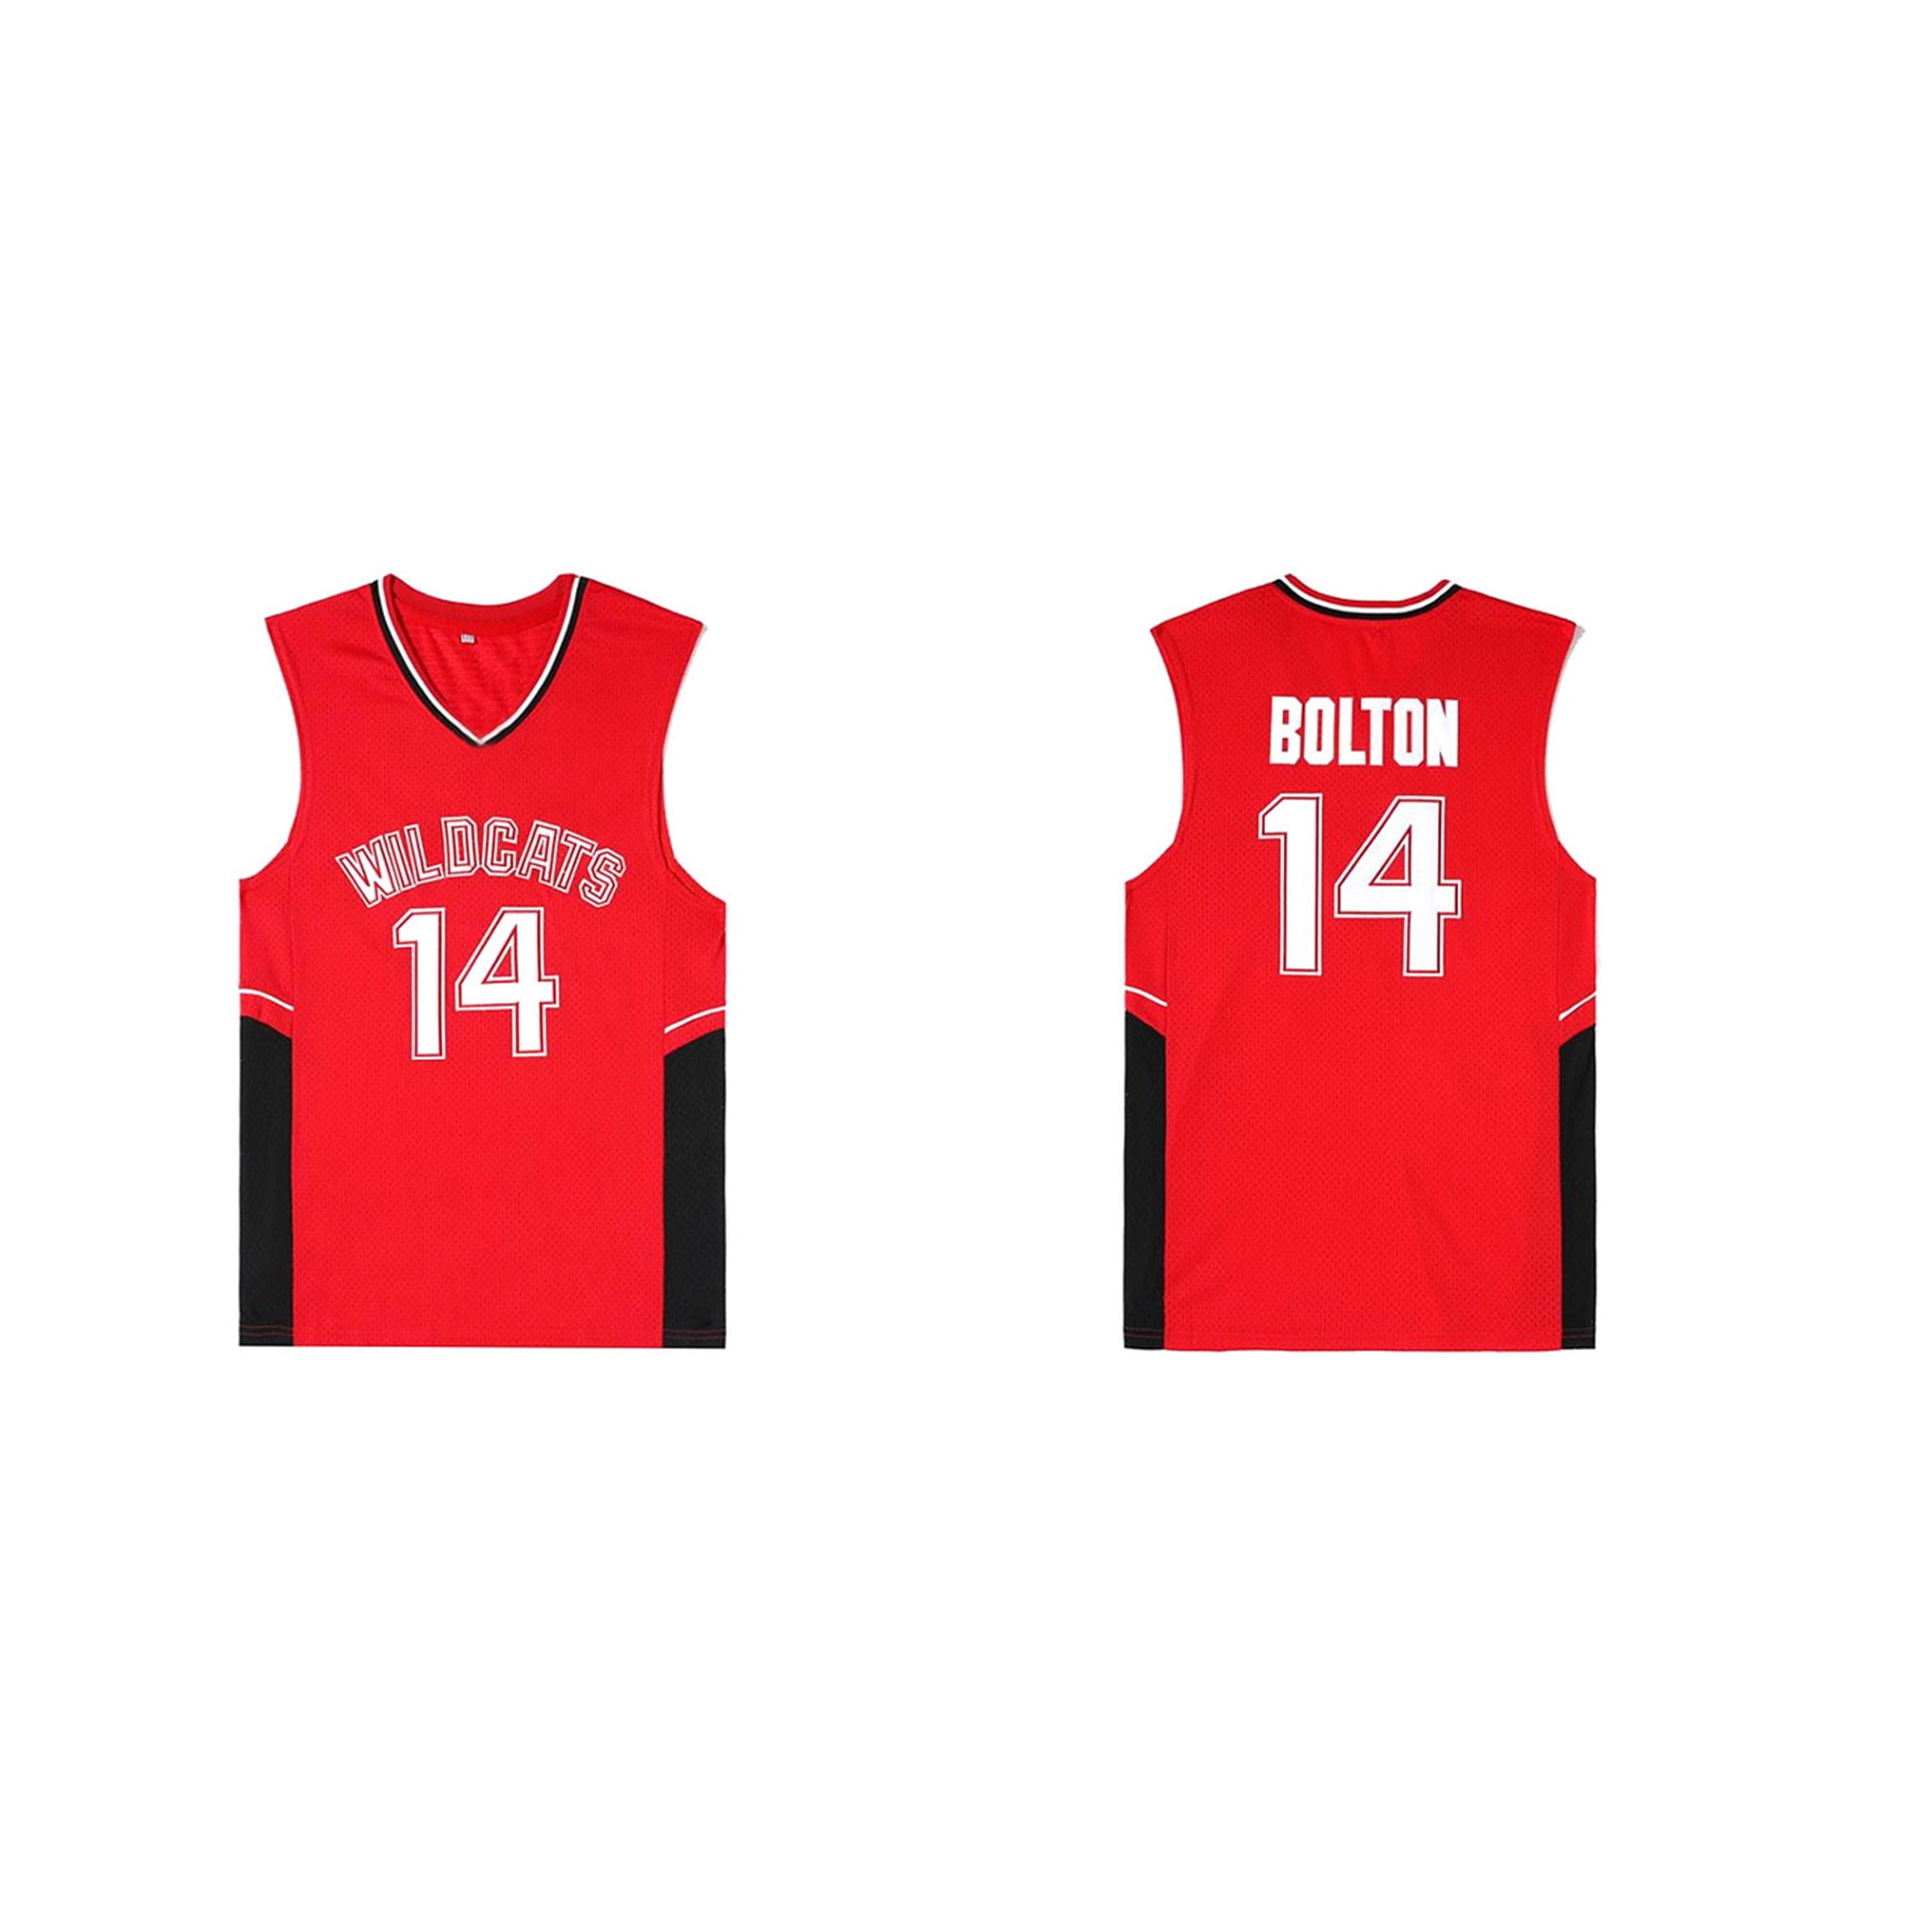 red basketball jersey template